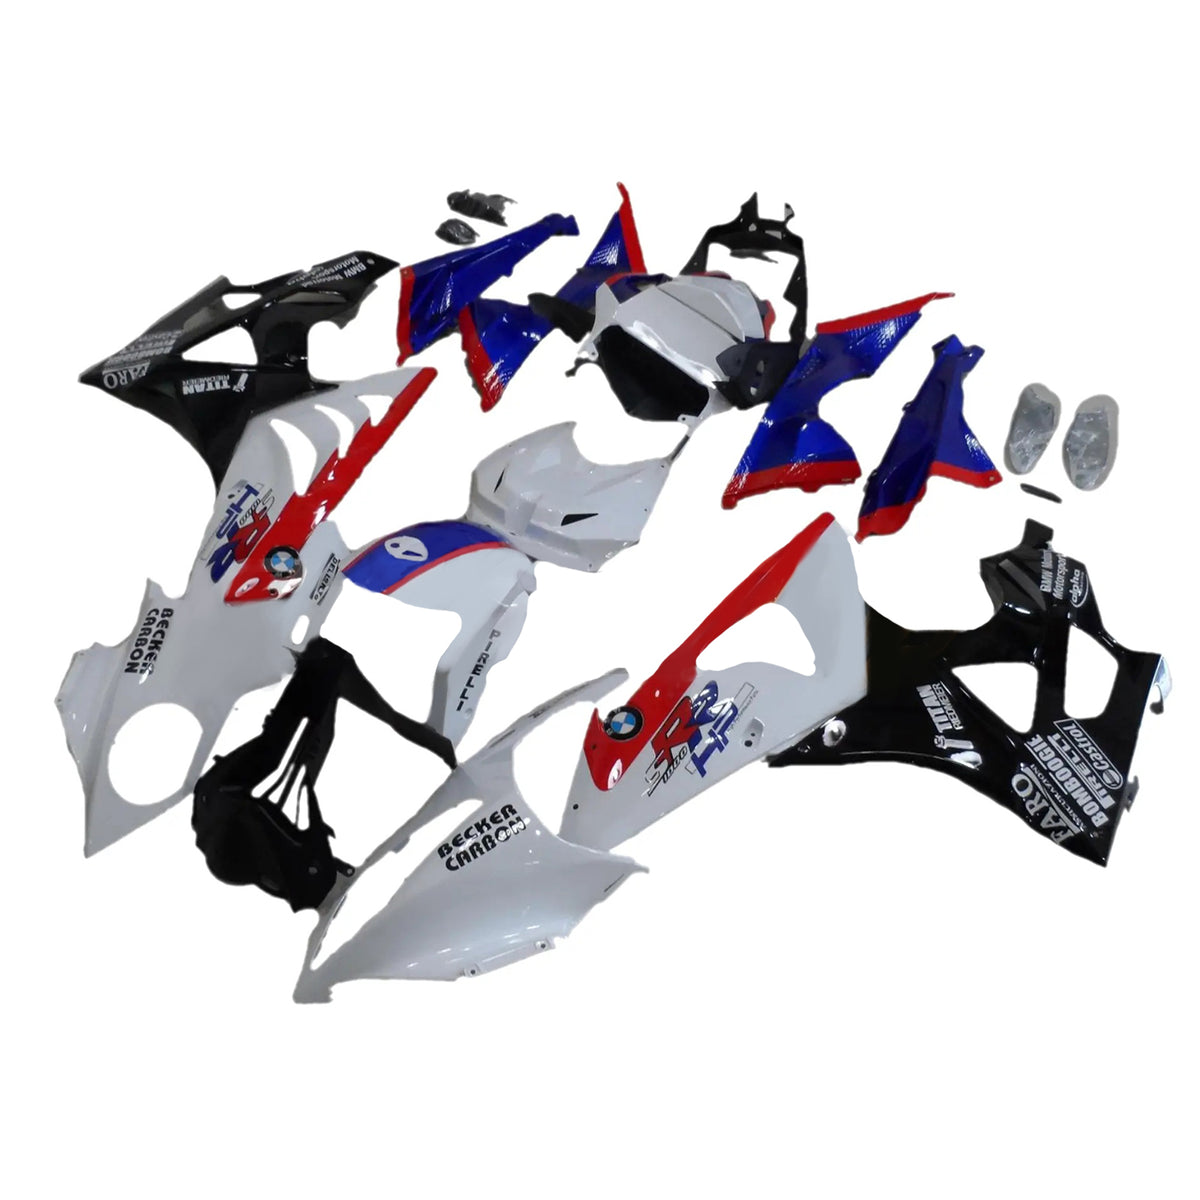 Amotopart BMW S1000RR 2009-2014 Blue&Red Style1 Fairing Kit